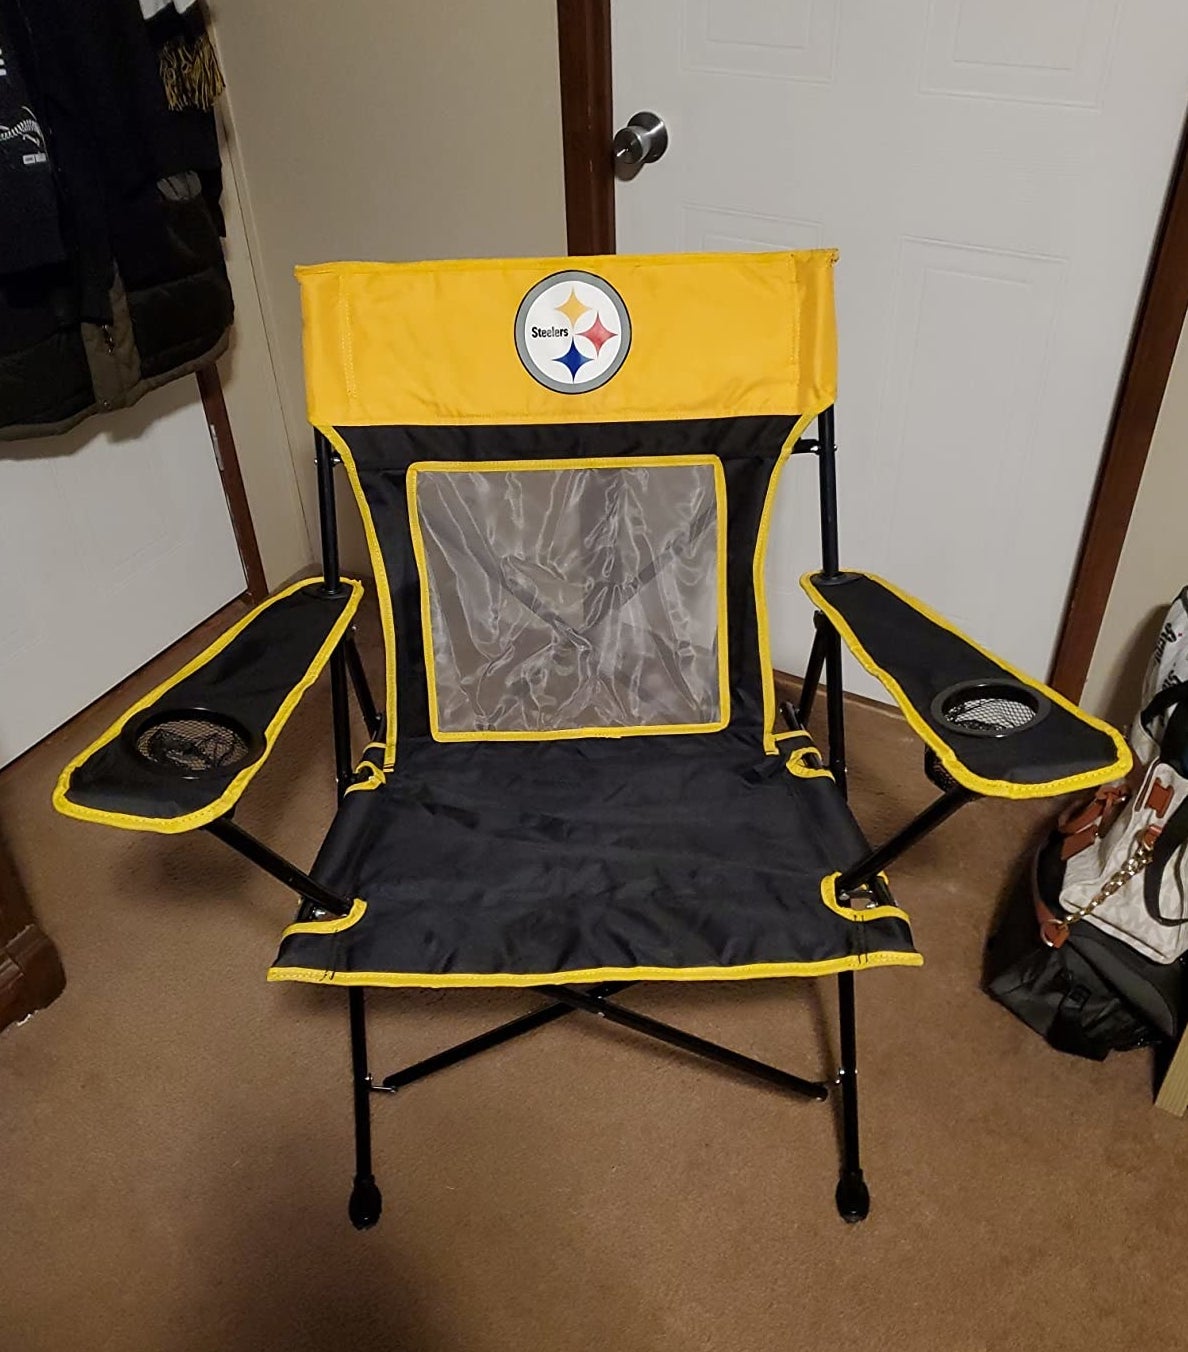 the Steelers chair